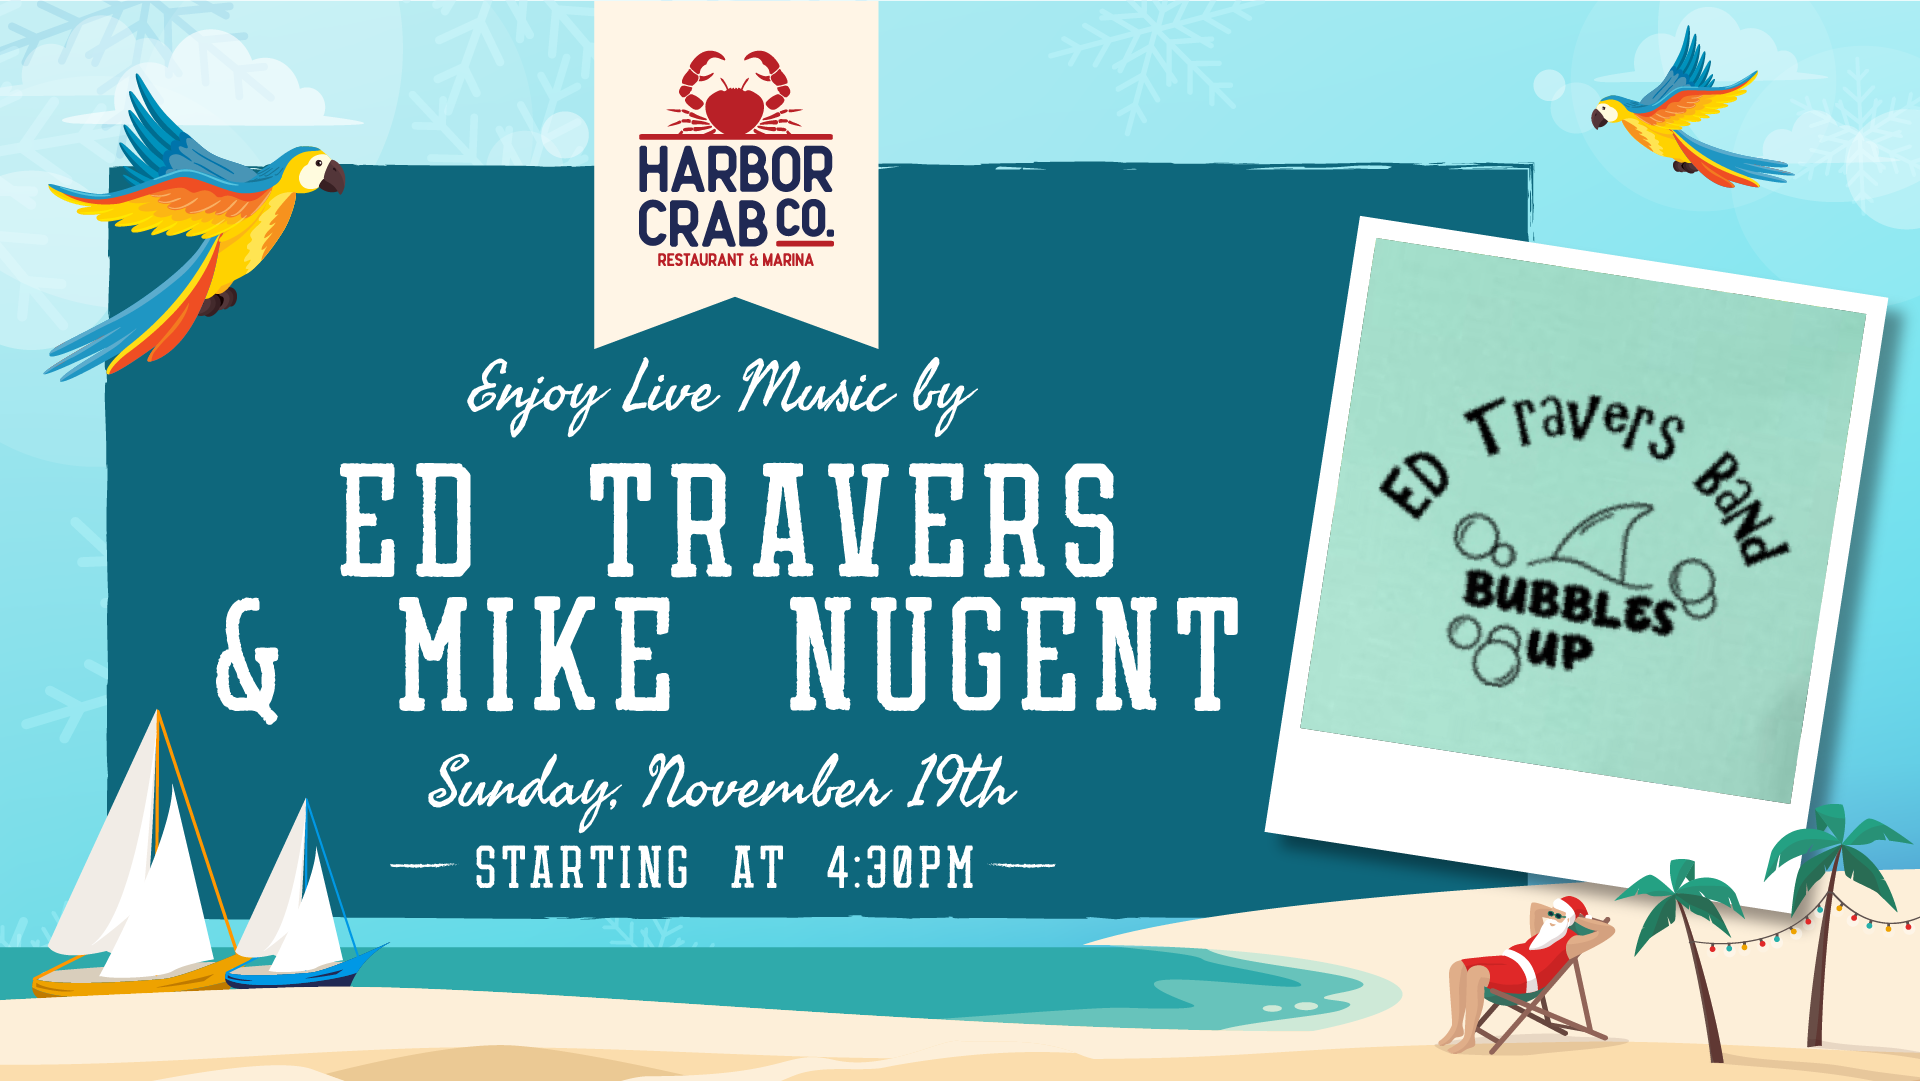 Live music by Ed Travers & Mike Nugent on Sunday, November 19th at 4:30pm